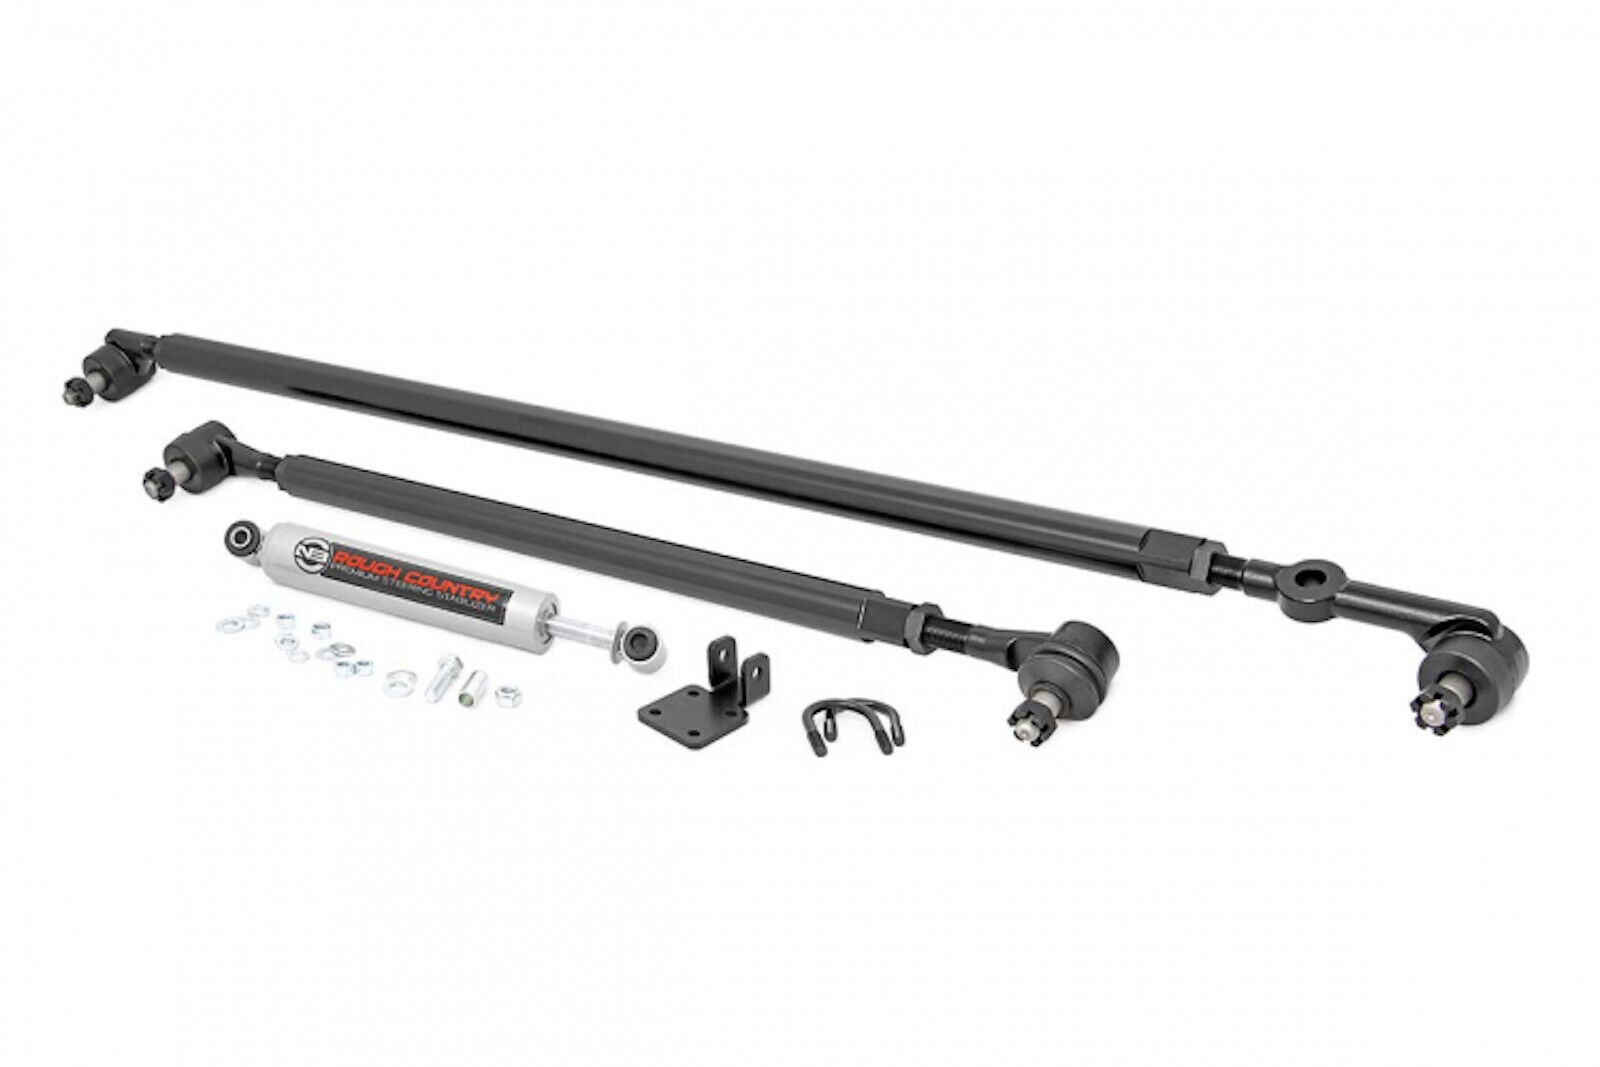 Rough Country 10613 HD Steering Kit w/ Stabilizer for Jeep Wrangler Cherokee 